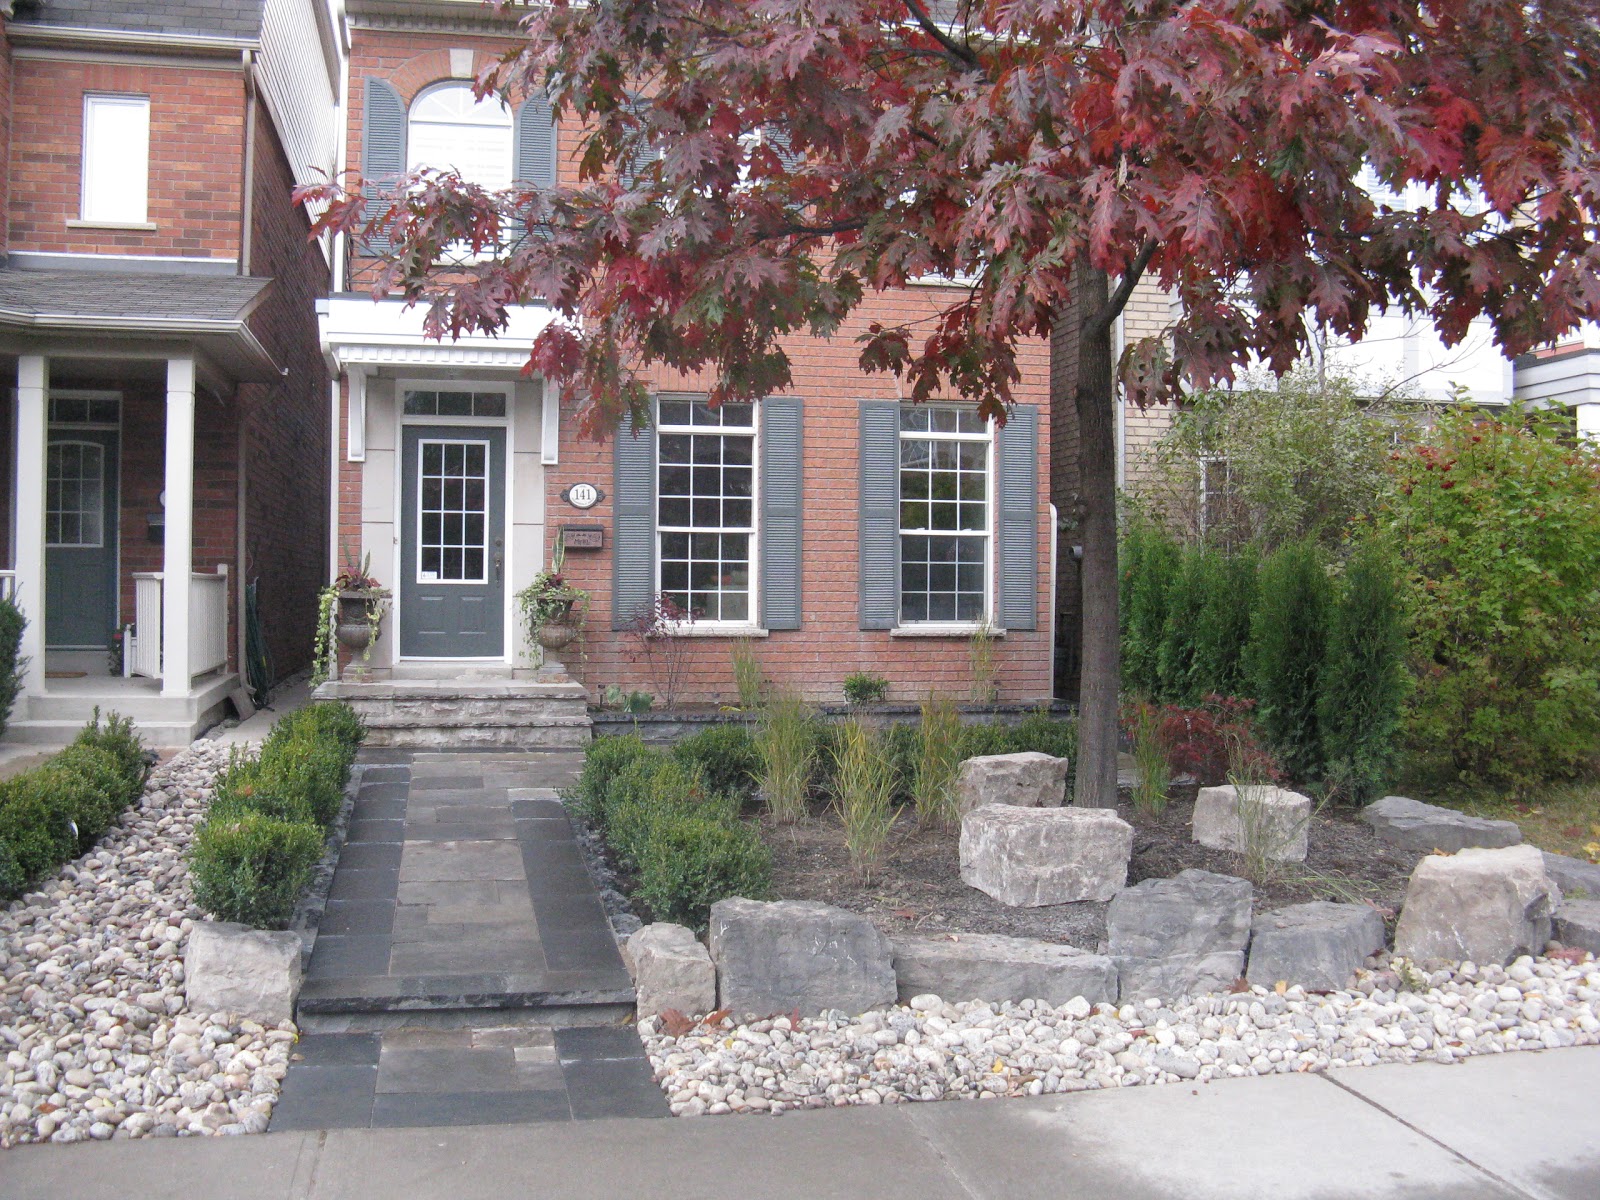 Paradise views Landscaping: Toronto landscaping project 